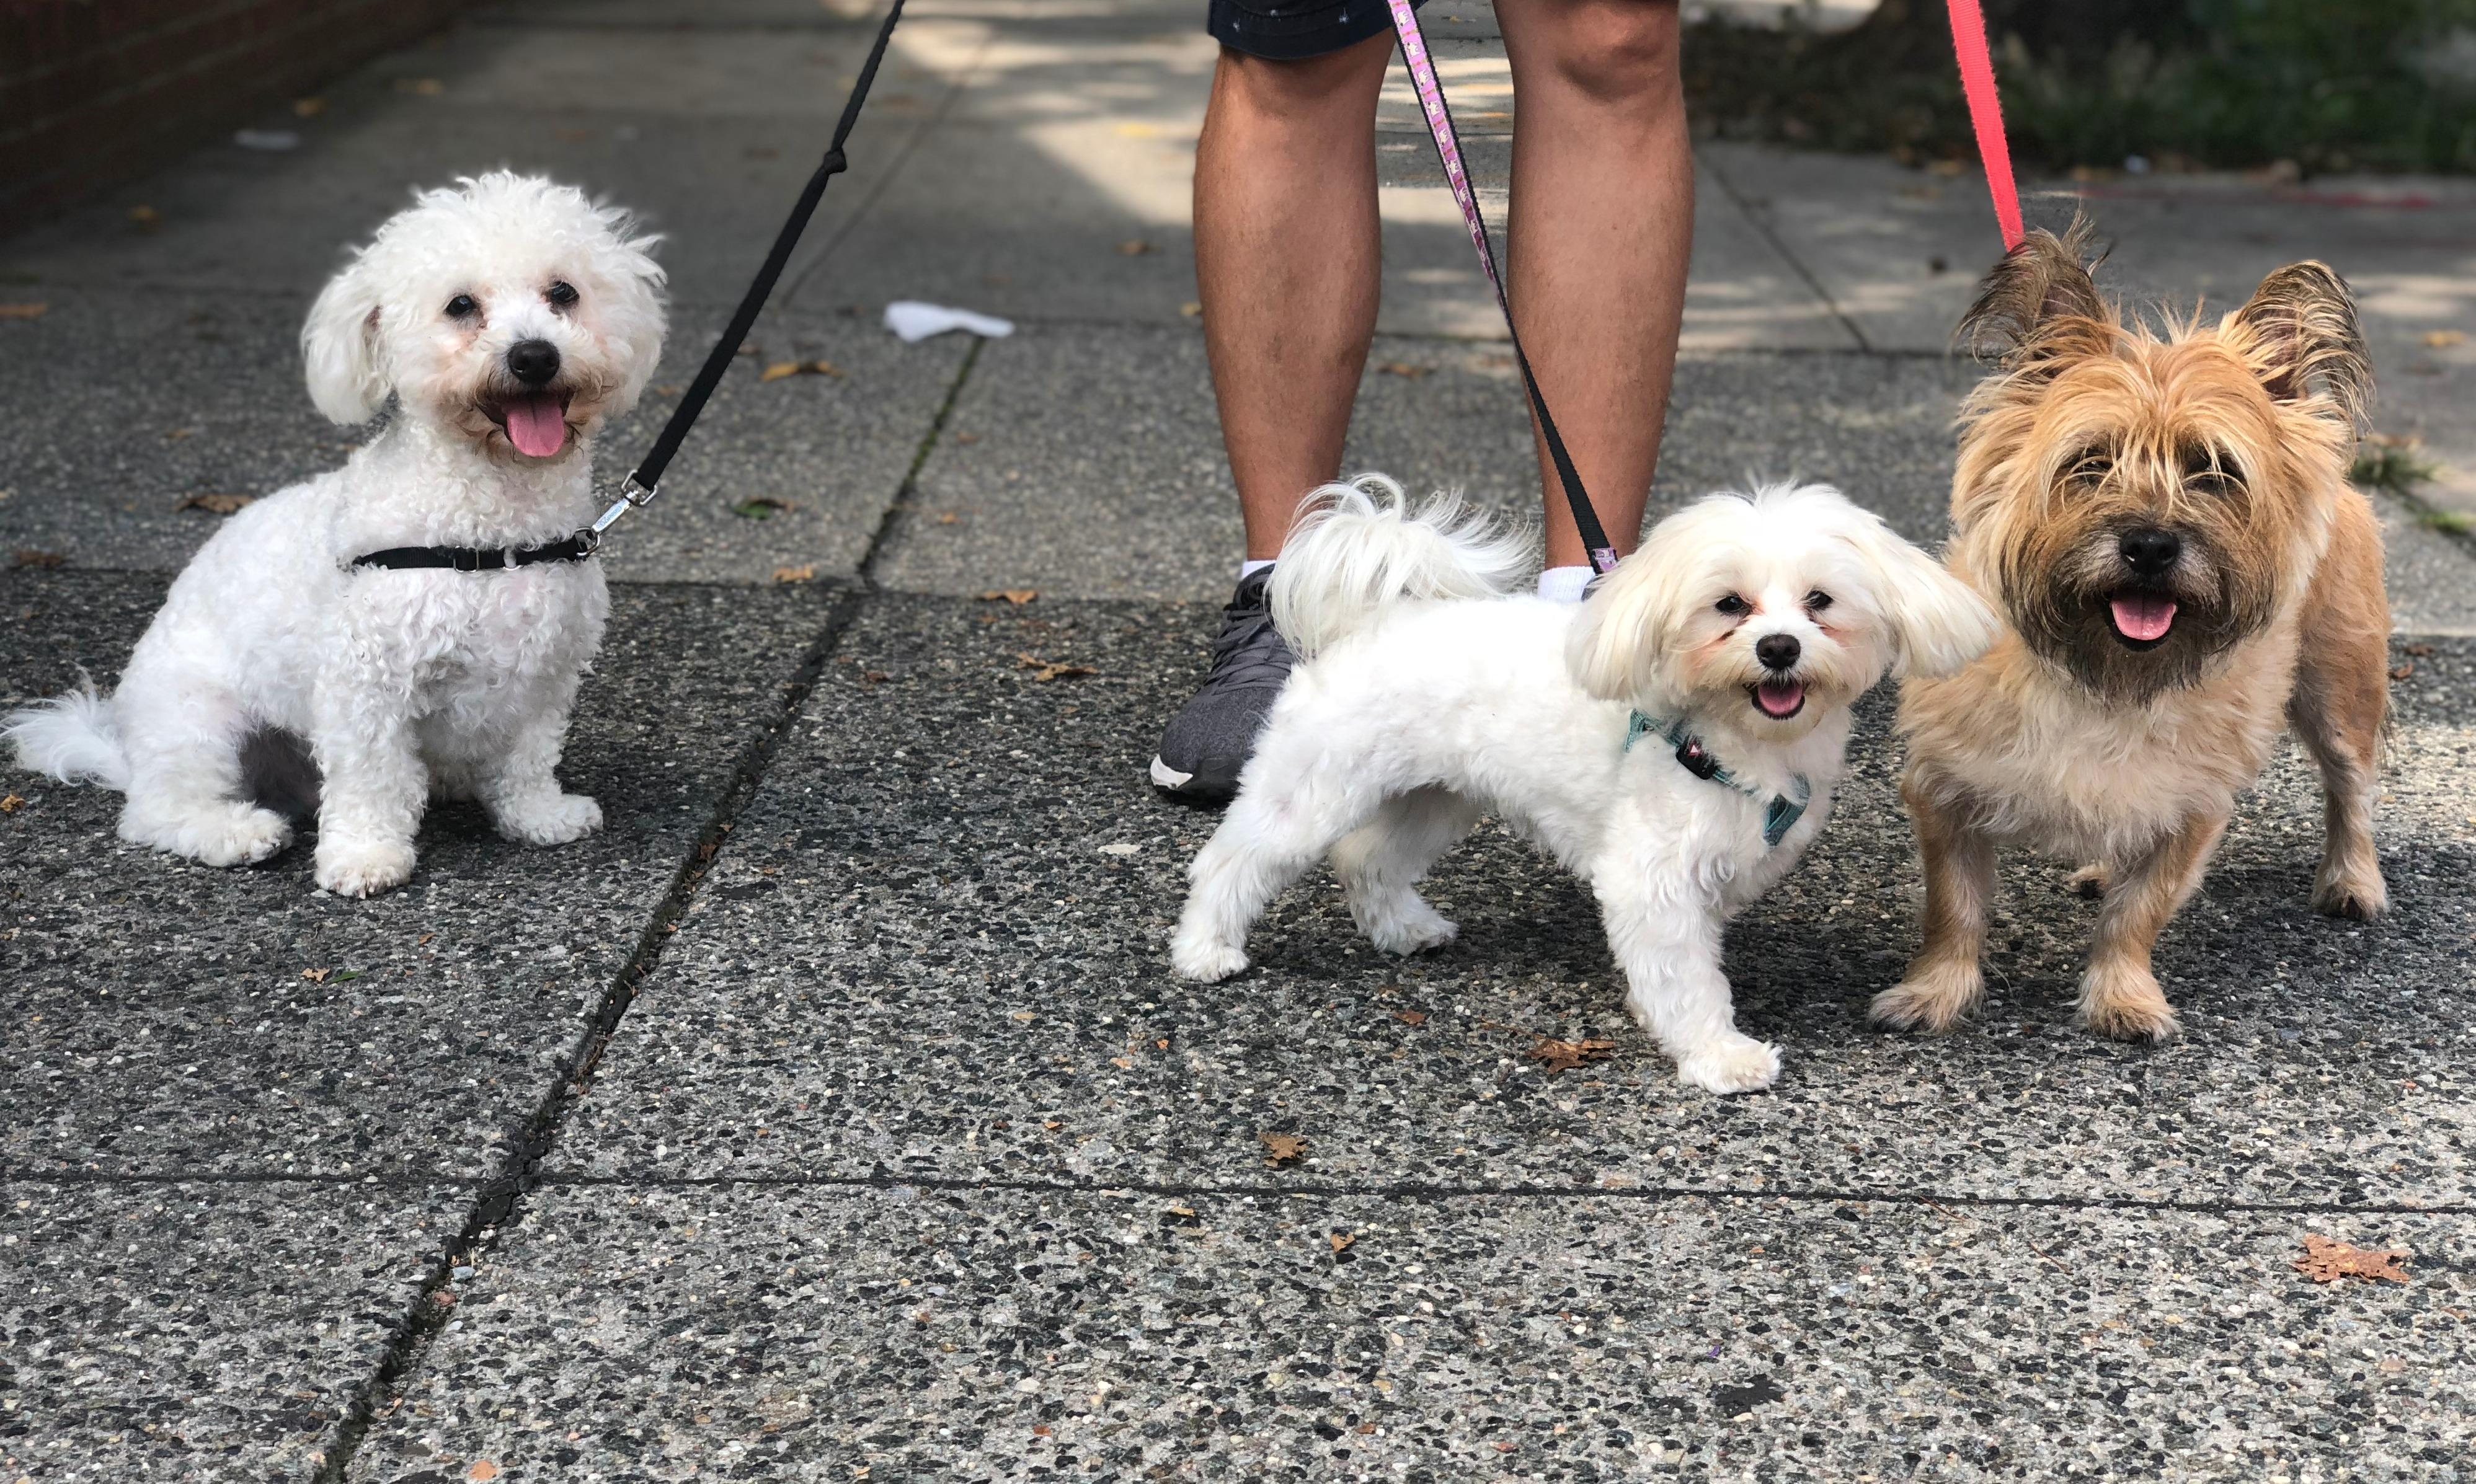 Buster and Whiskers - Astoria Dog Walking Service Photo